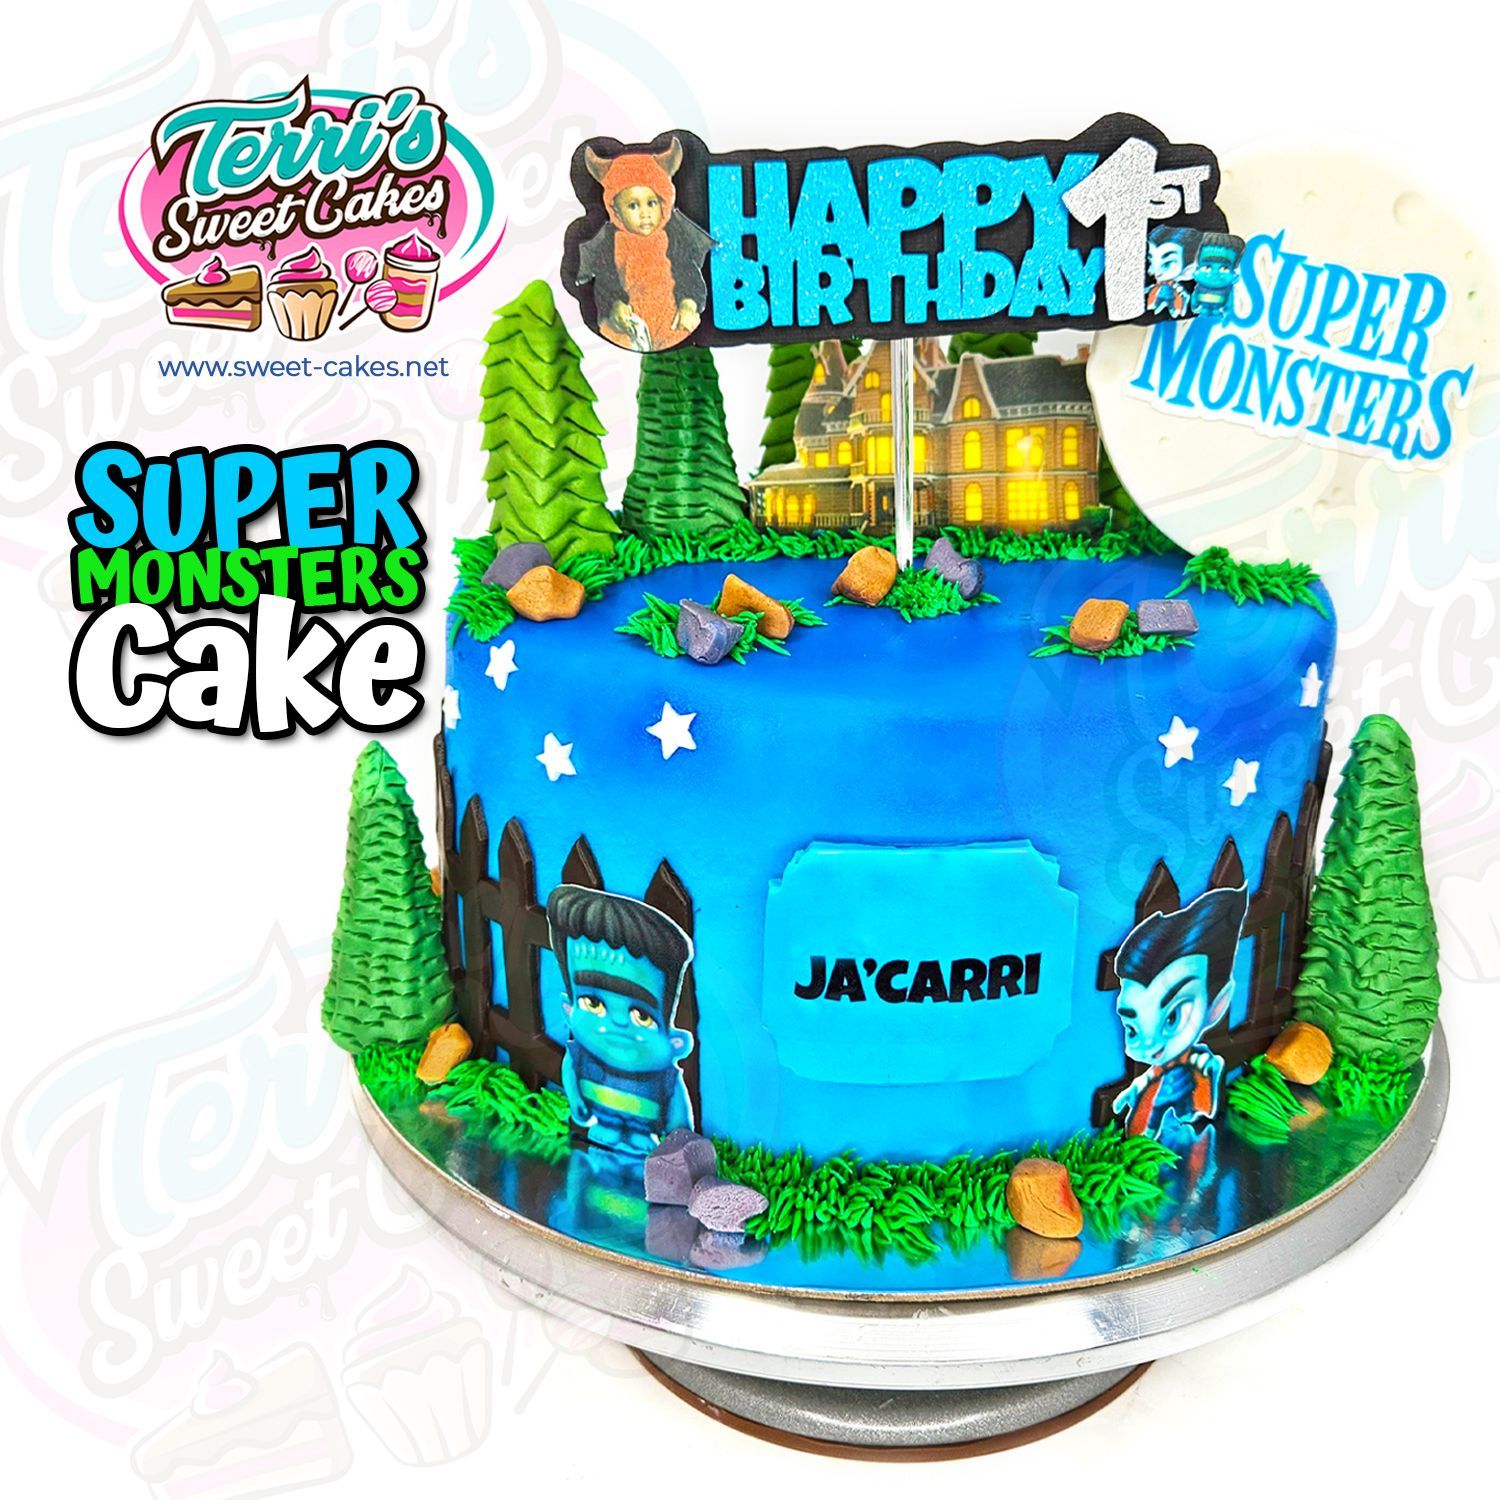 Super Monsters Themed Birthday Cake by Terri's Sweet Cakes